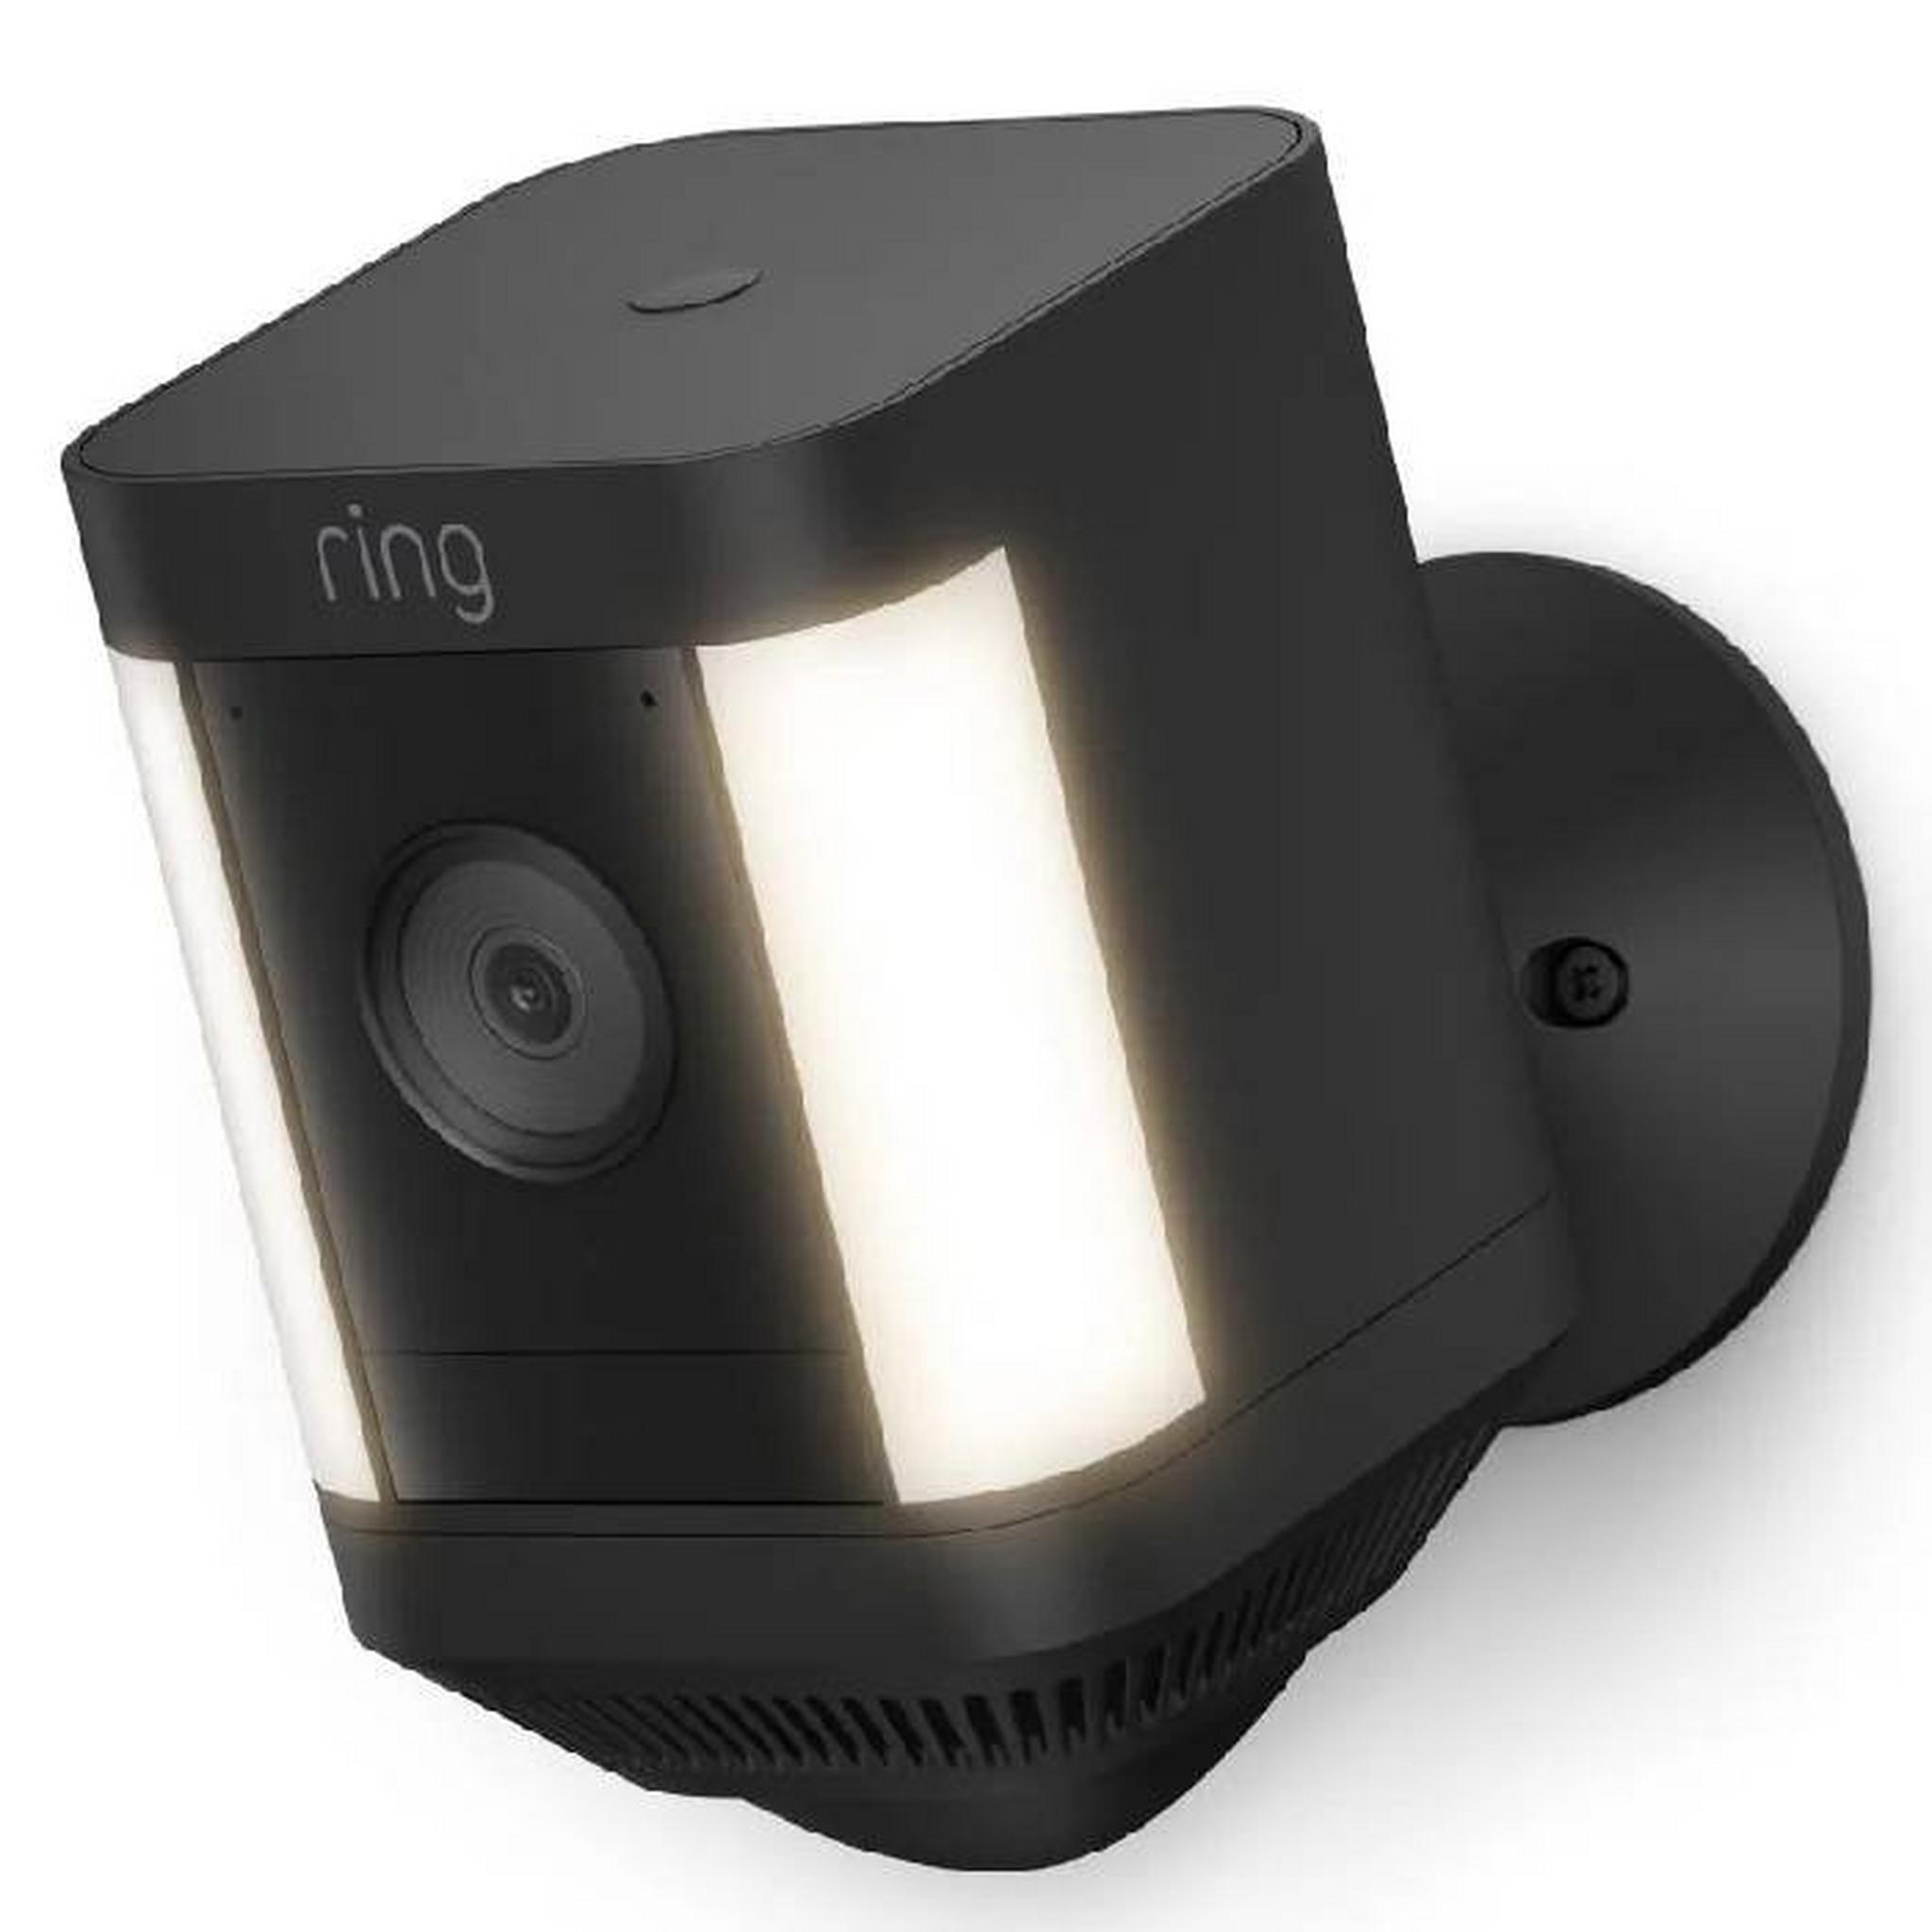 Ring Spotlight Cam Plus with Battery In Security Camera, with Built -in Security Siren, +2 LED Spotlights, 8SB1S2-BME0 -Black